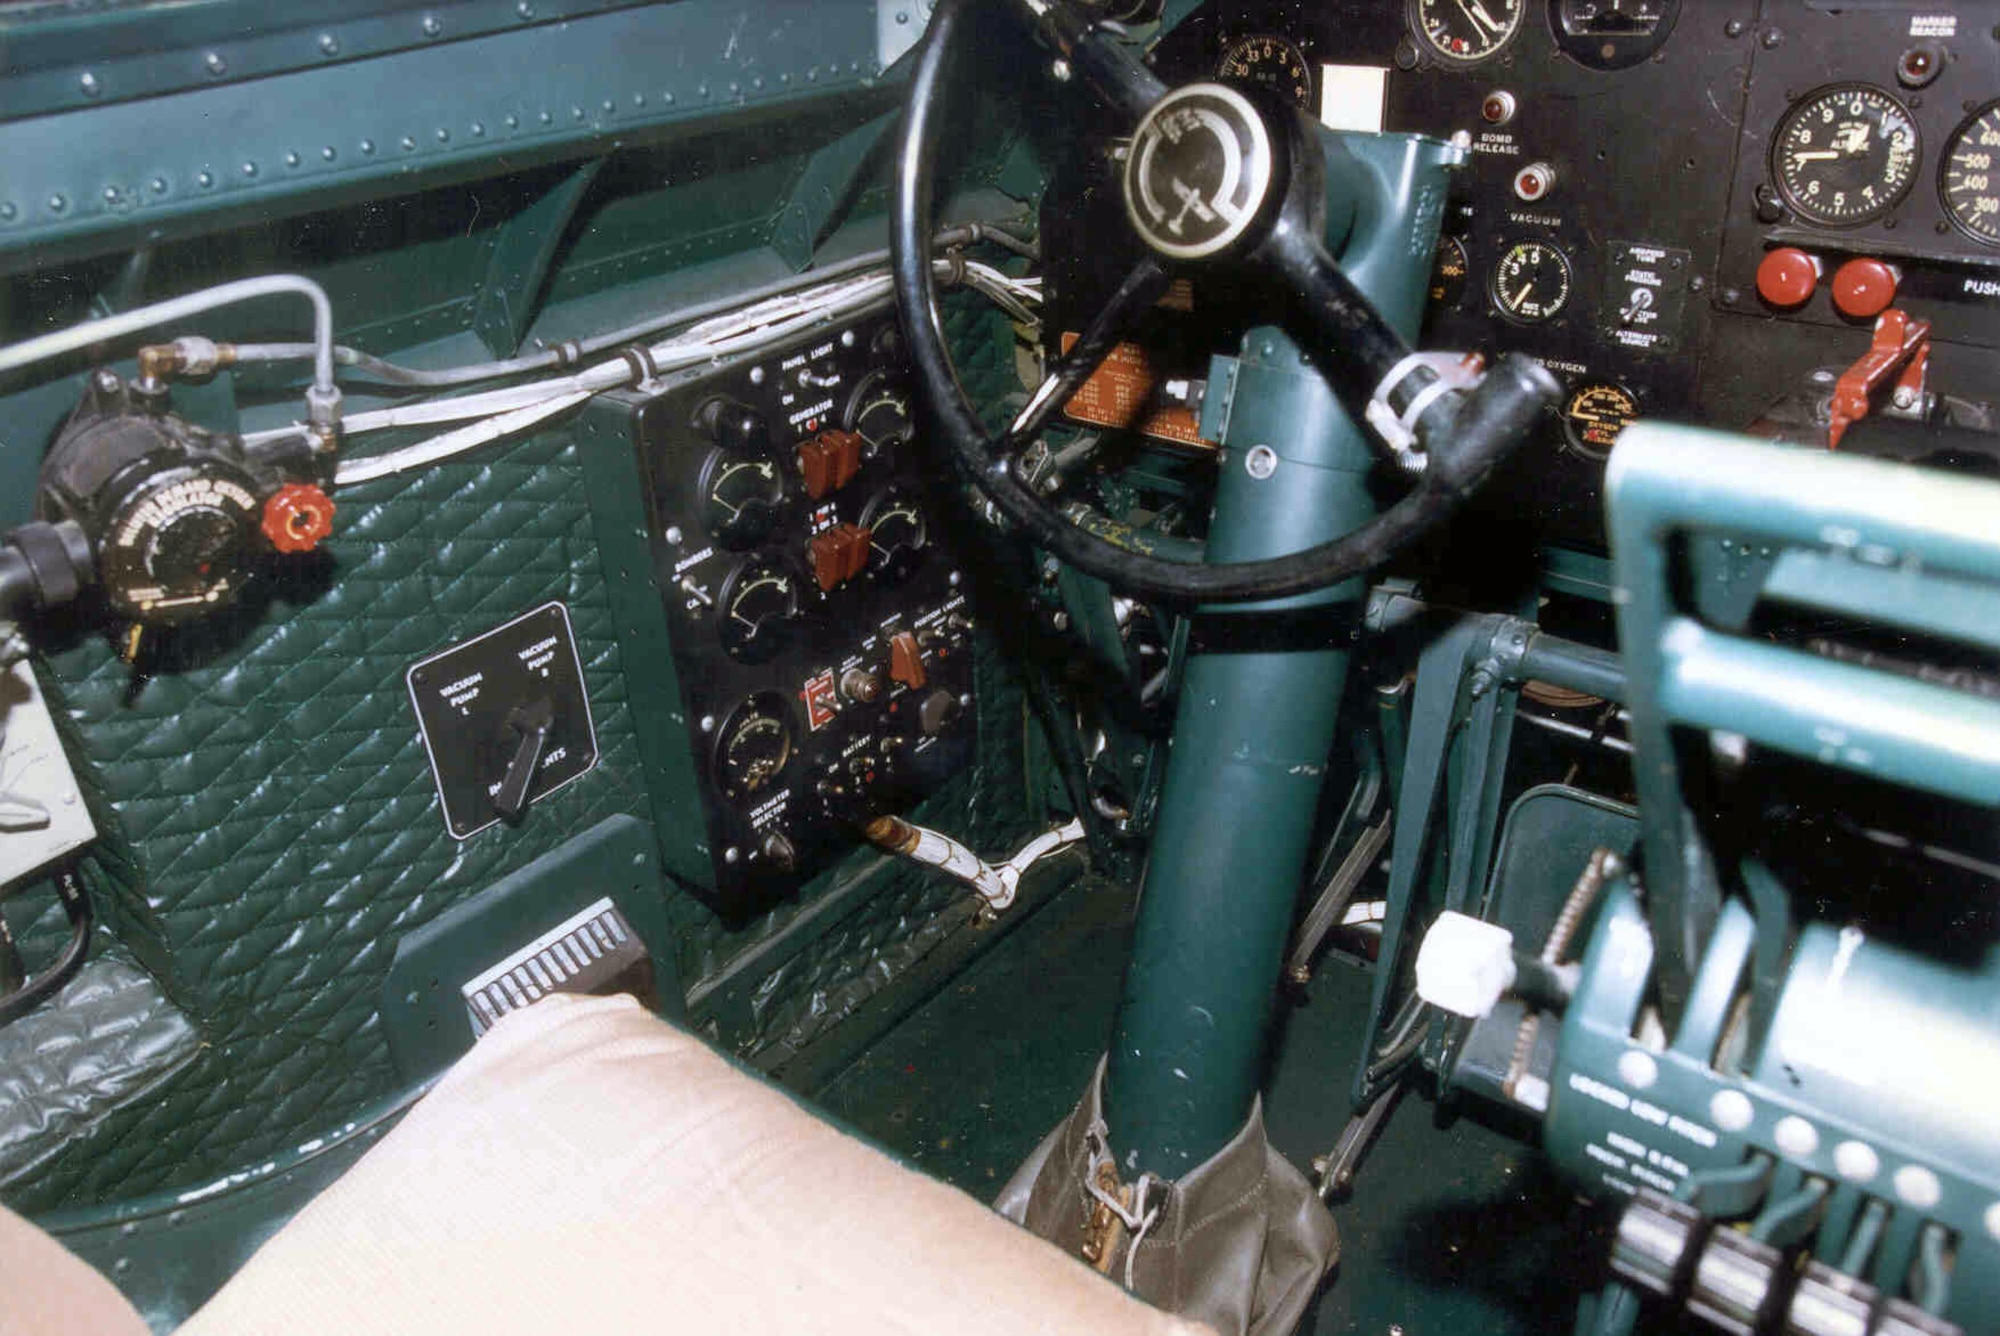 DAYTON, Ohio - Boeing B-17G Flying Fortress cockpit at the National Museum of the U.S. Air Force. (U.S. Air Force photo)